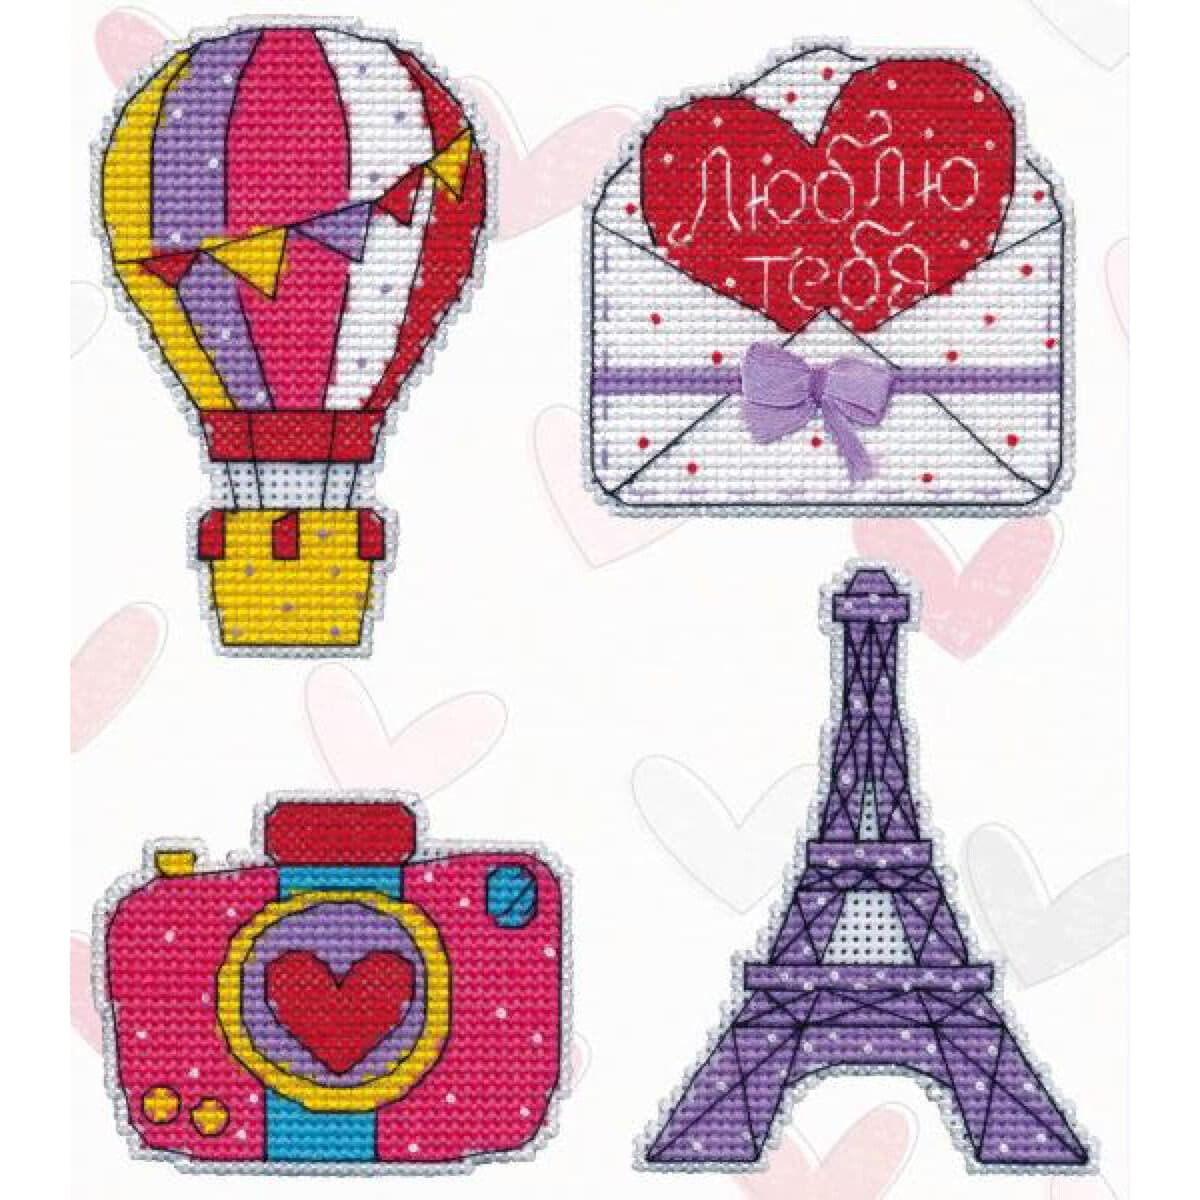 Oven counted cross stitch kit "Magnets. Travel to...